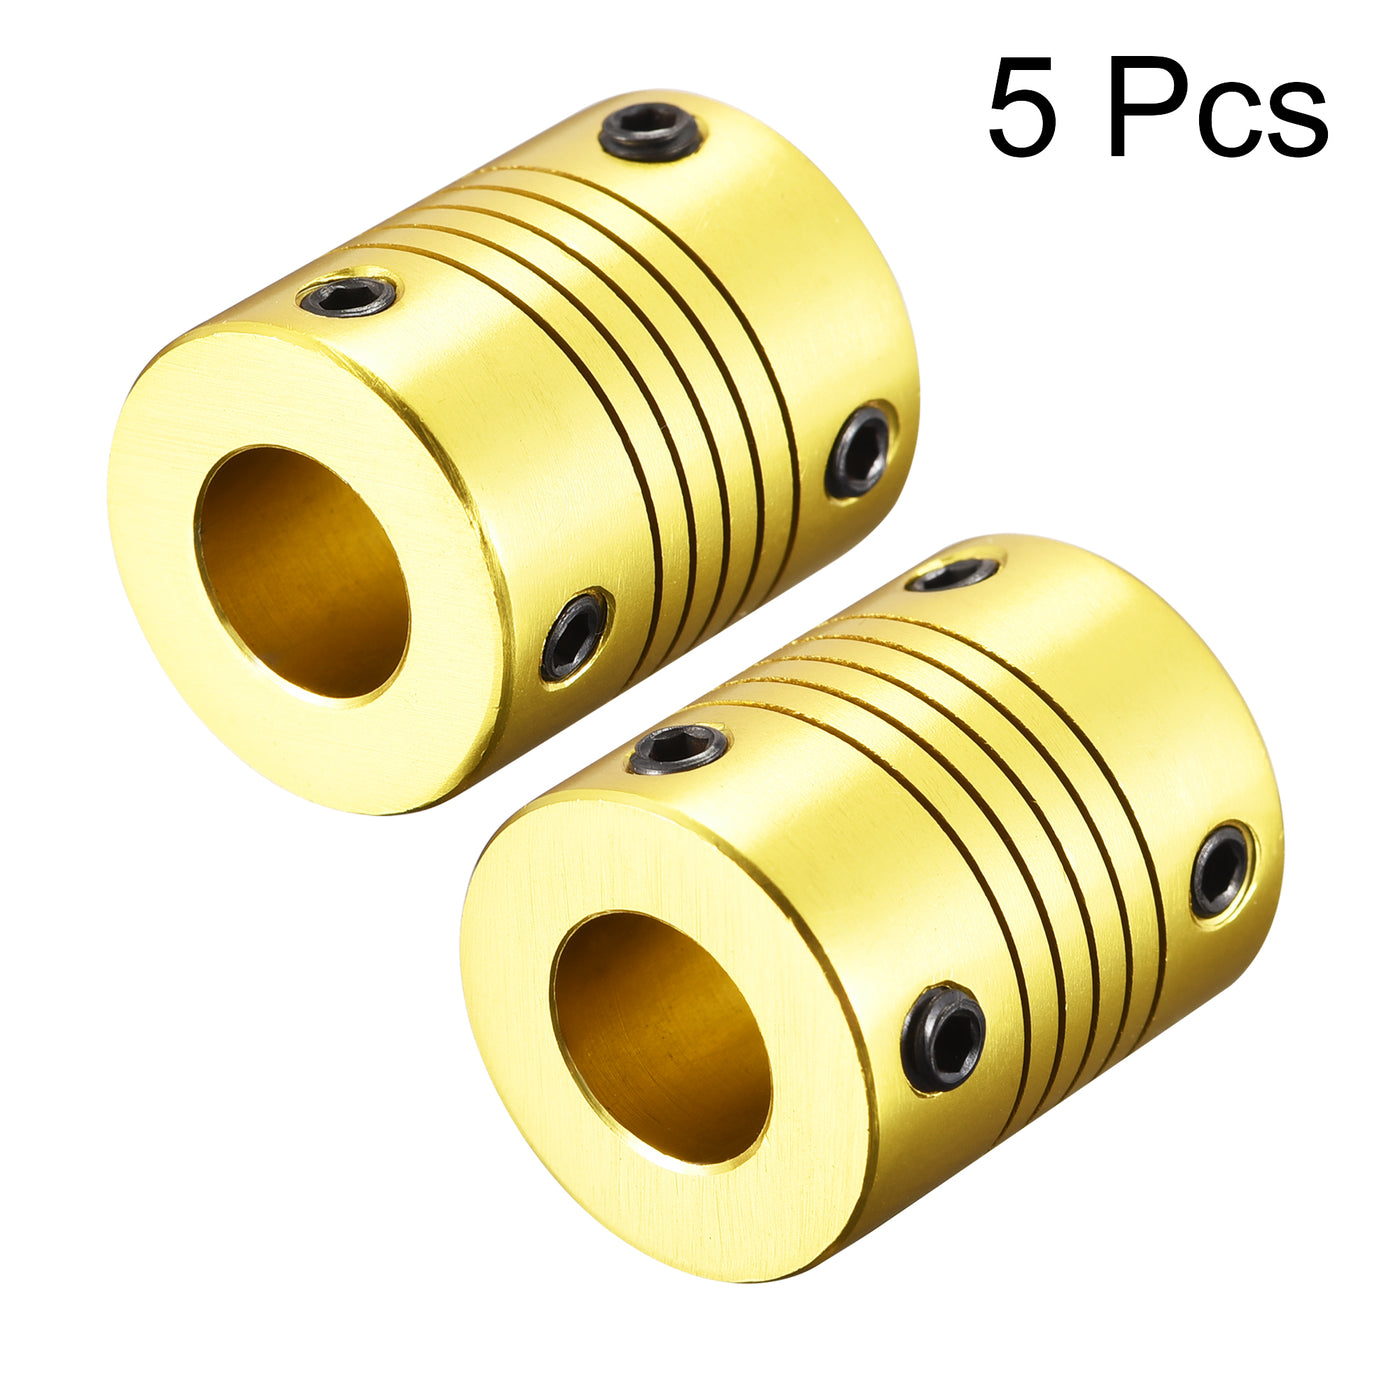 uxcell Uxcell 5 Pcs 10mm to 10mm Aluminum Alloy Shaft Coupling Flexible L25xD20 Golden Tone